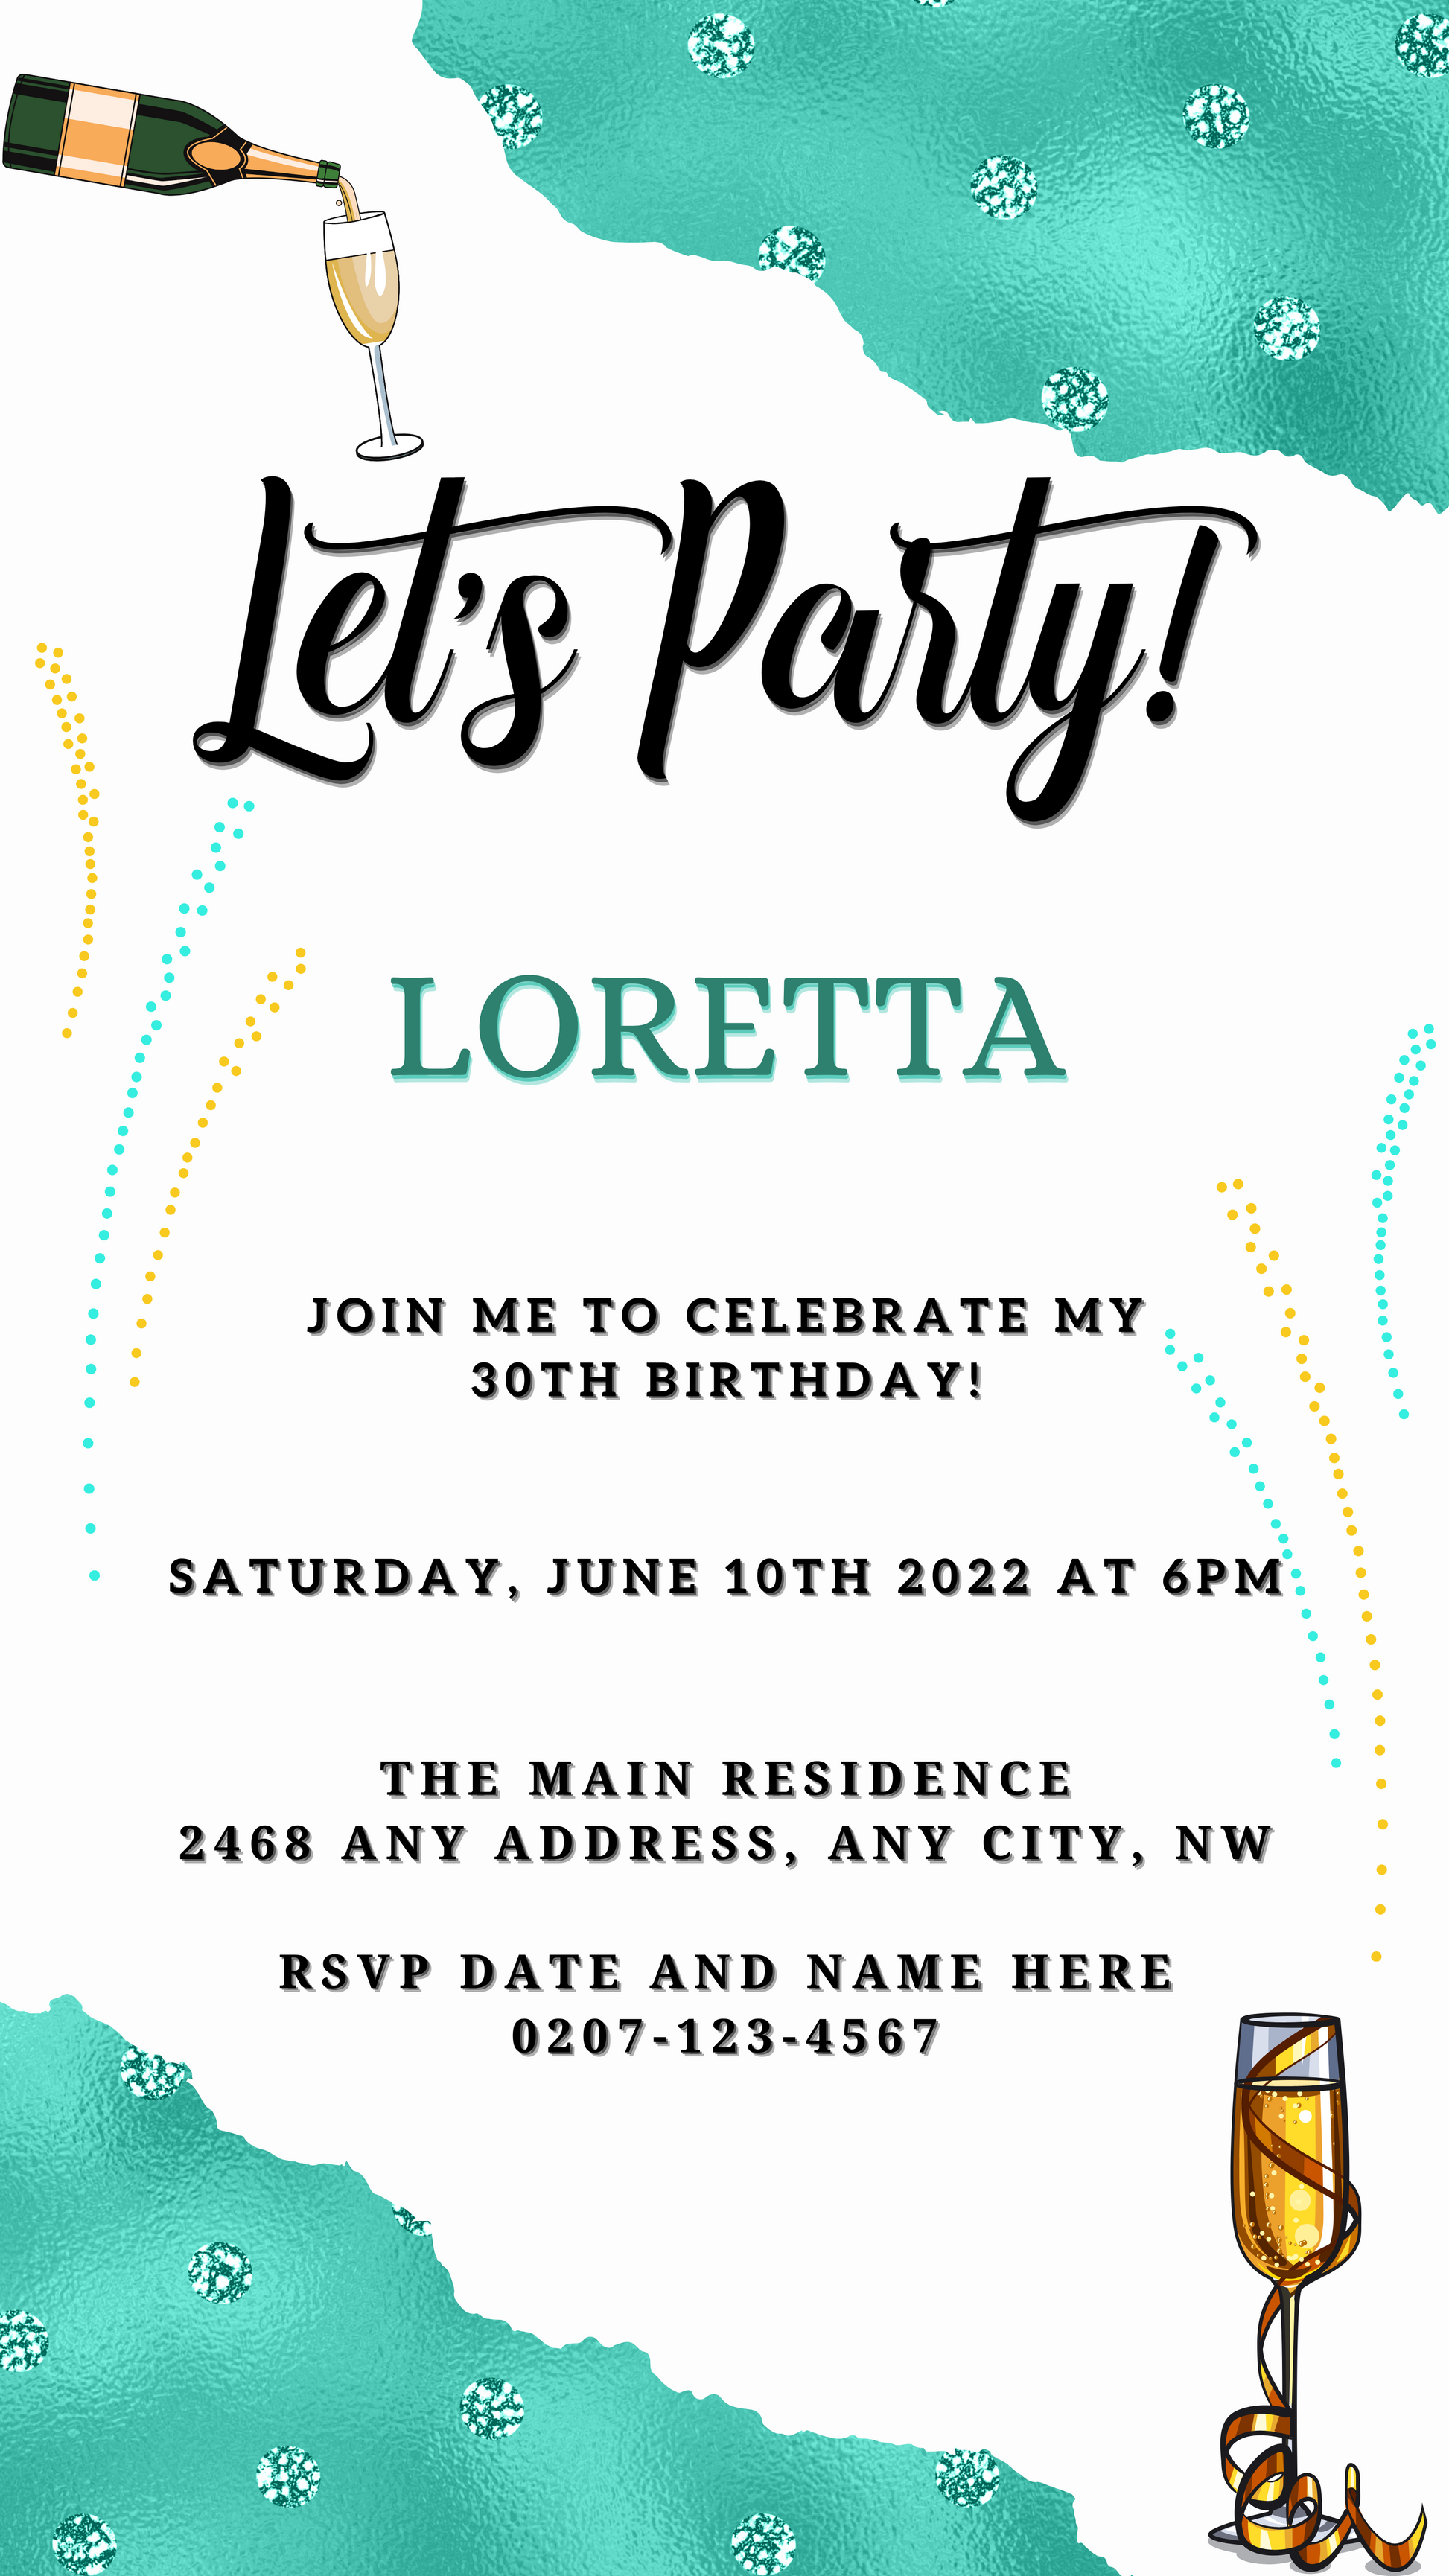 White Teal Diamond Sparkle customisable digital party invite with black text and colorful dots, champagne glass, and editable features for easy personalization via Canva.